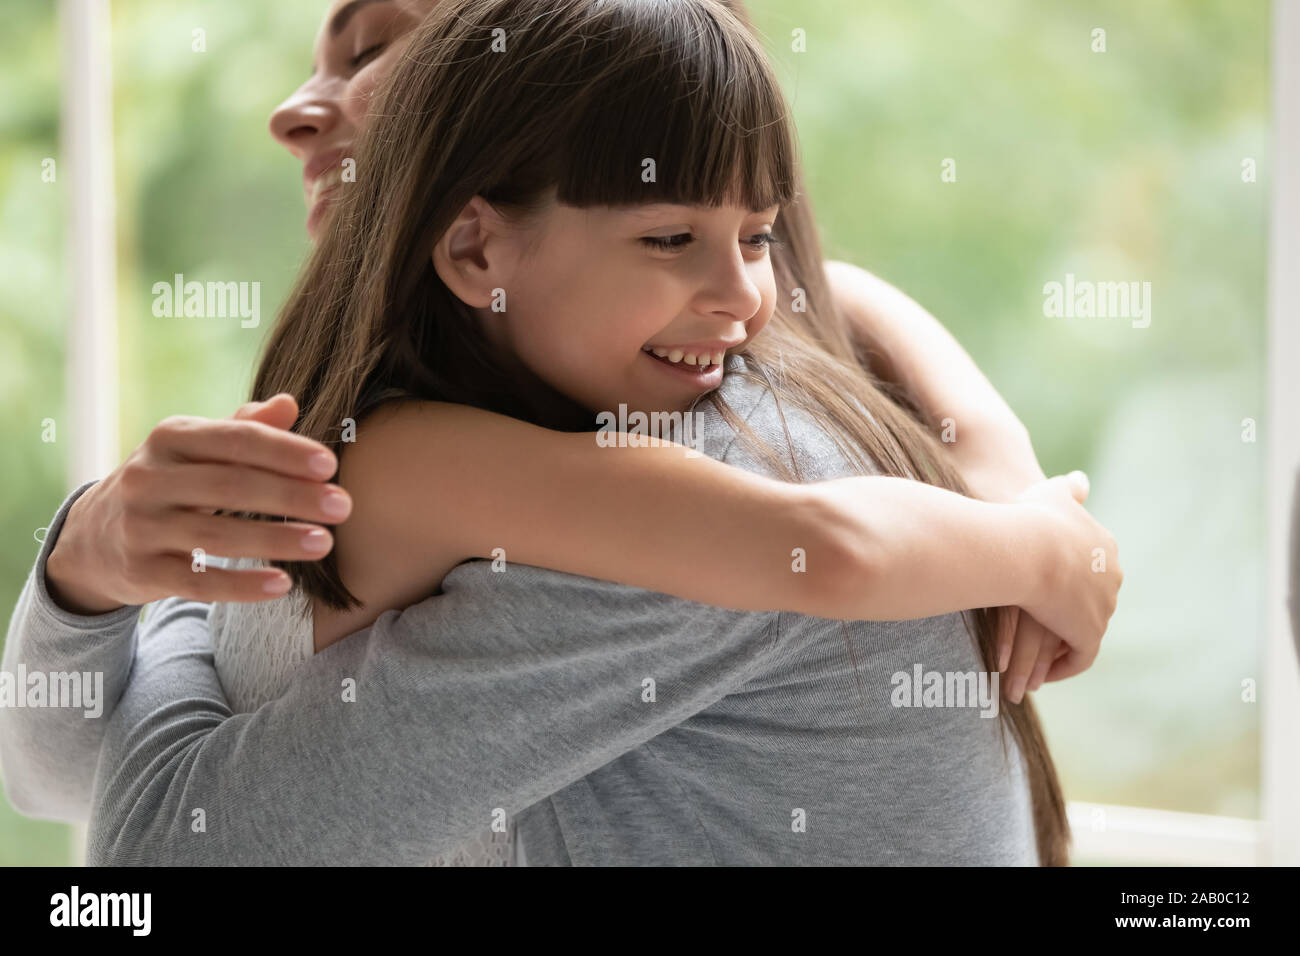 Loving mother strong cuddling little cute daughter closeup image Stock Photo